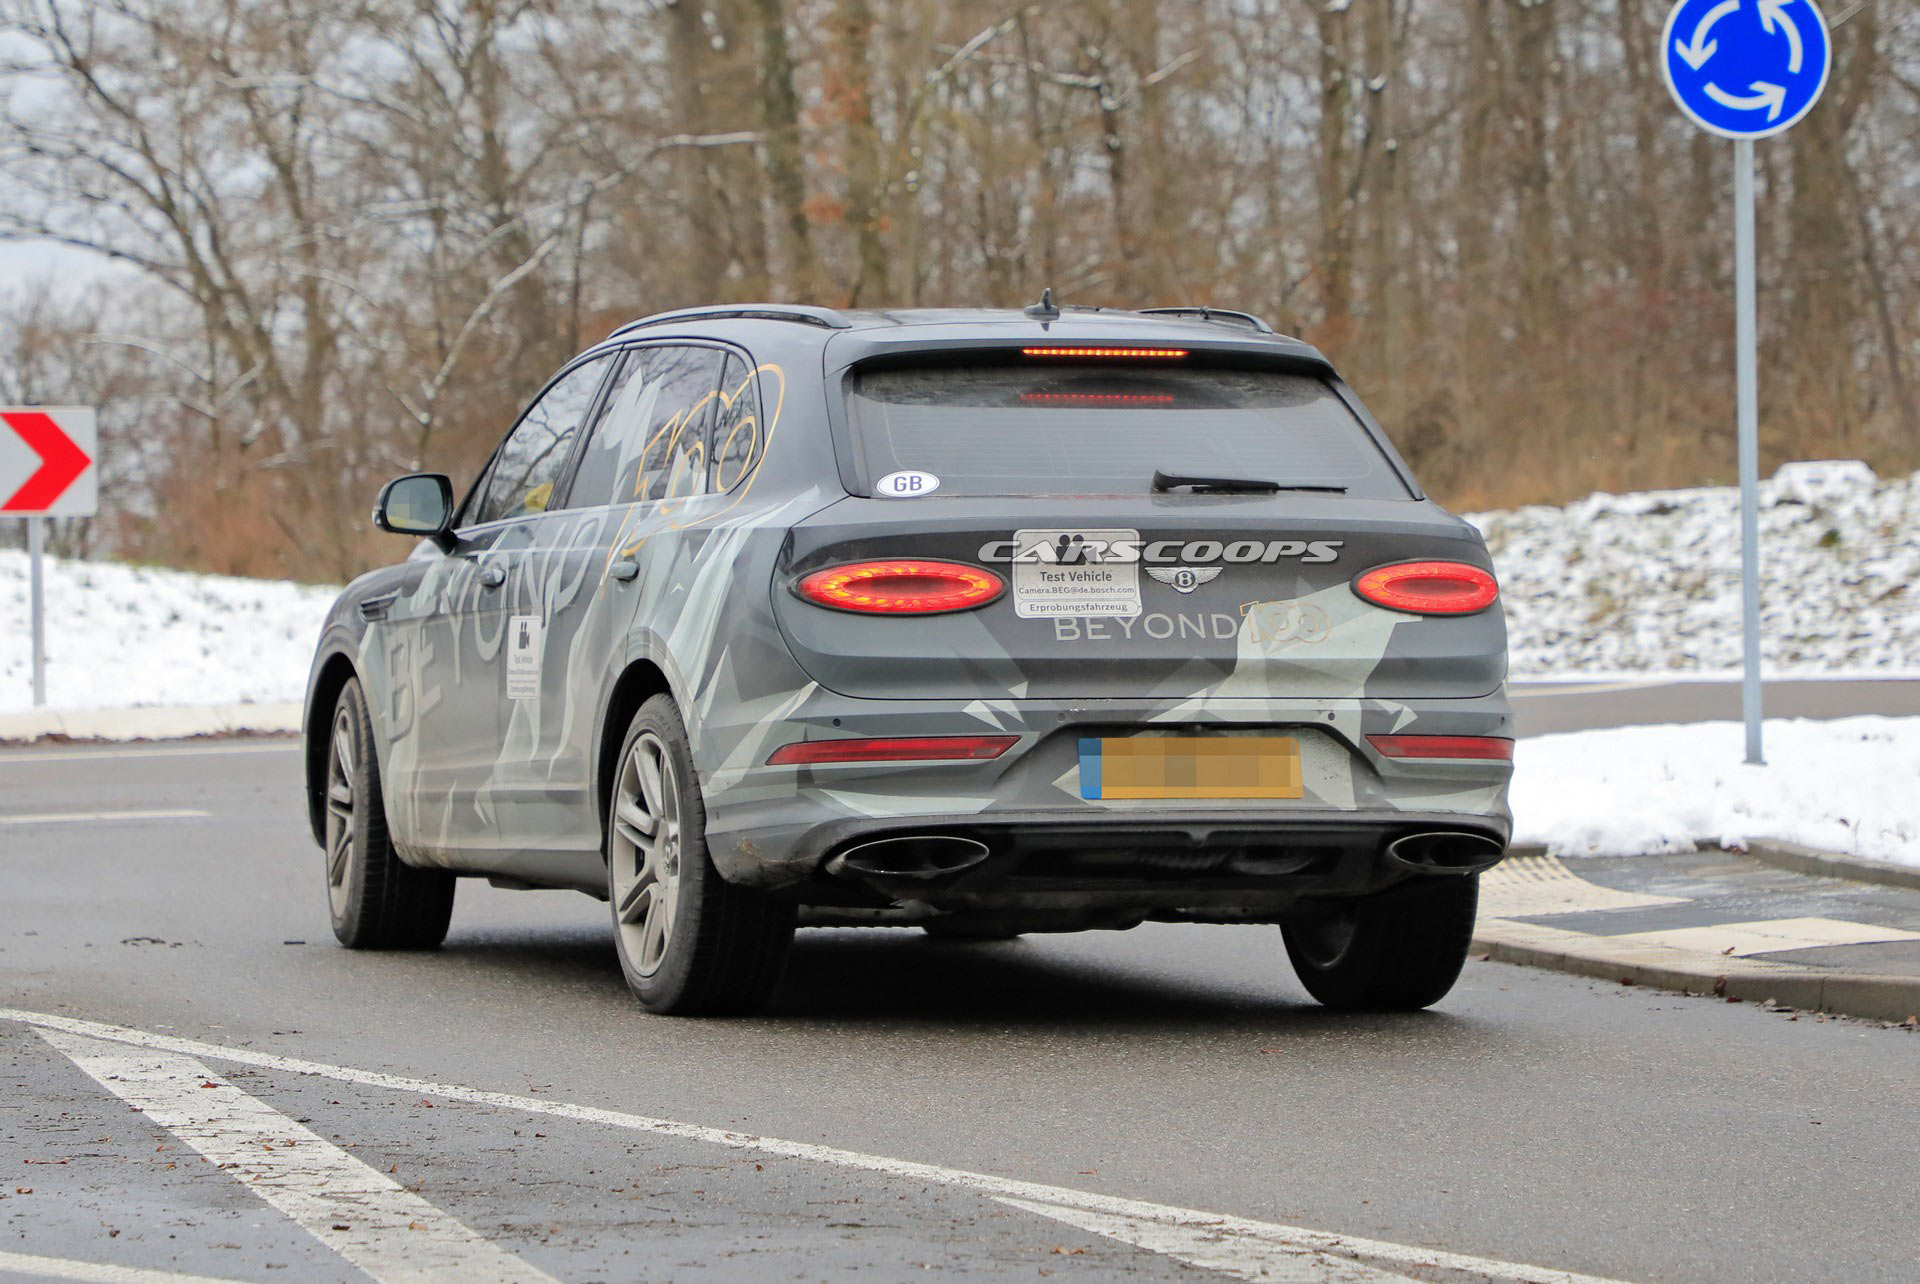 2022 Bentley Bentayga EWB Stretches Its Legs And Will ...